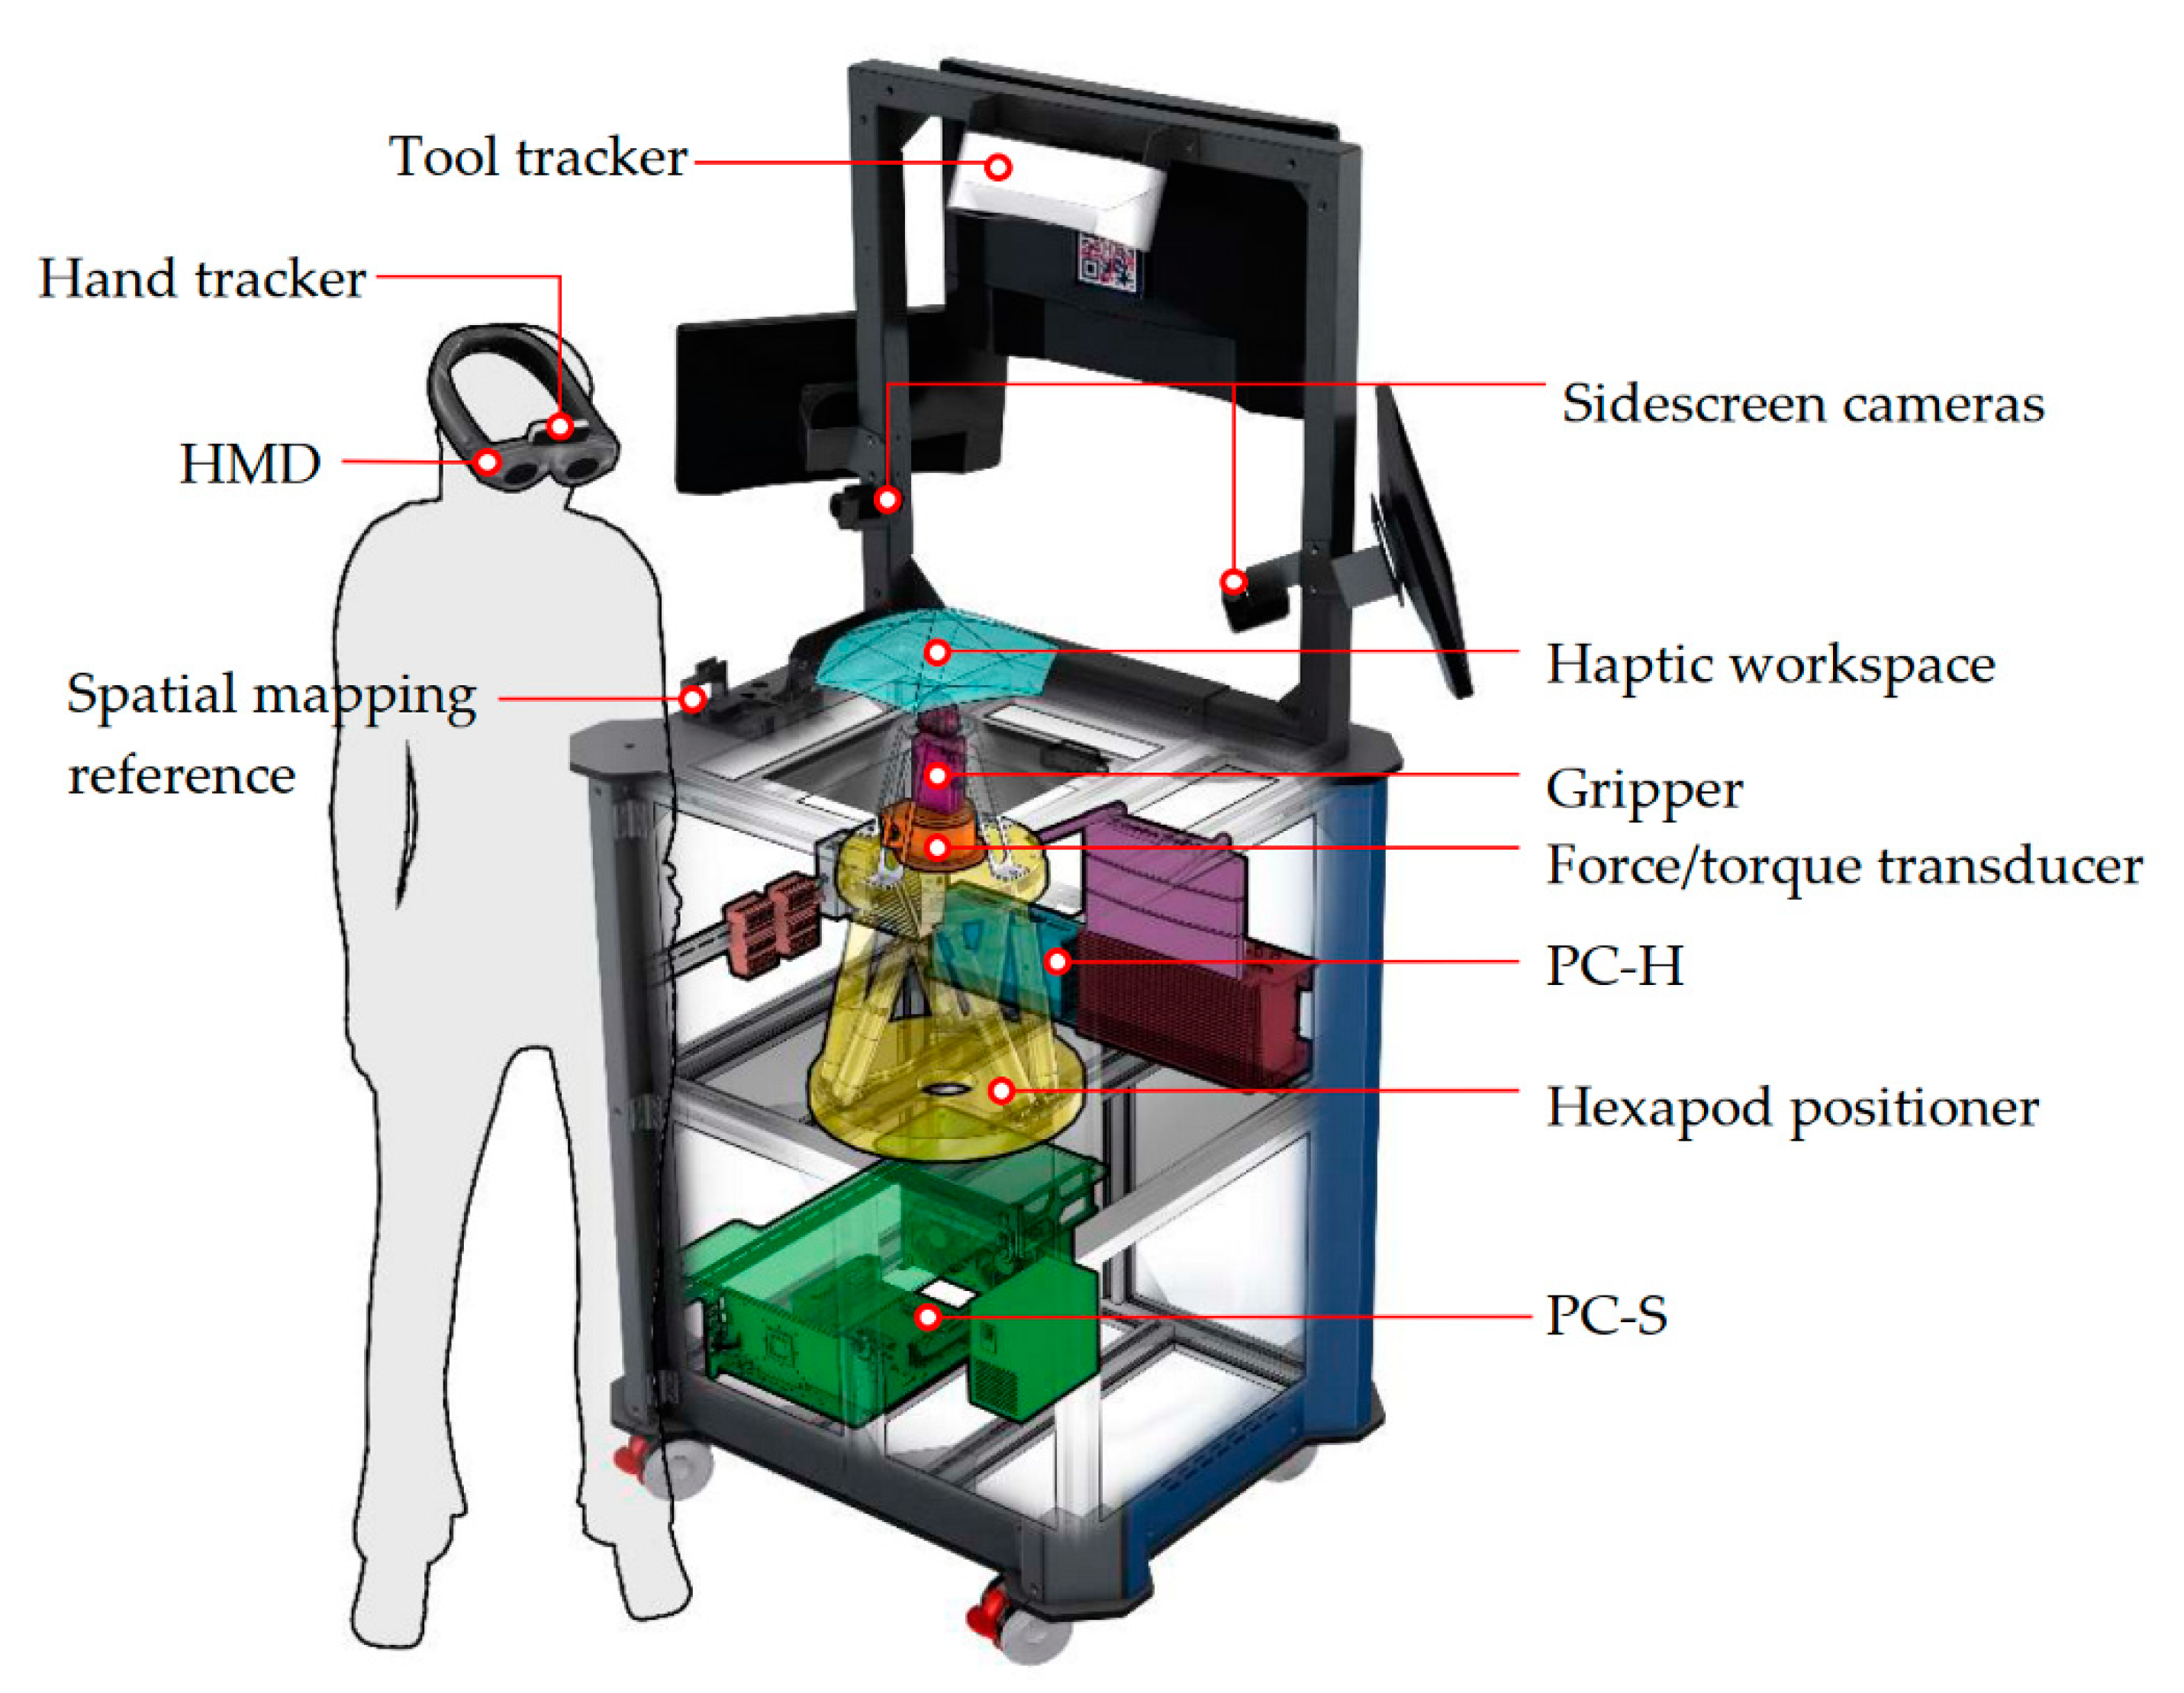 Applied Sciences Free Full Text Visuo Haptic Mixed Reality Simulation Using Unbound Handheld Tools Html